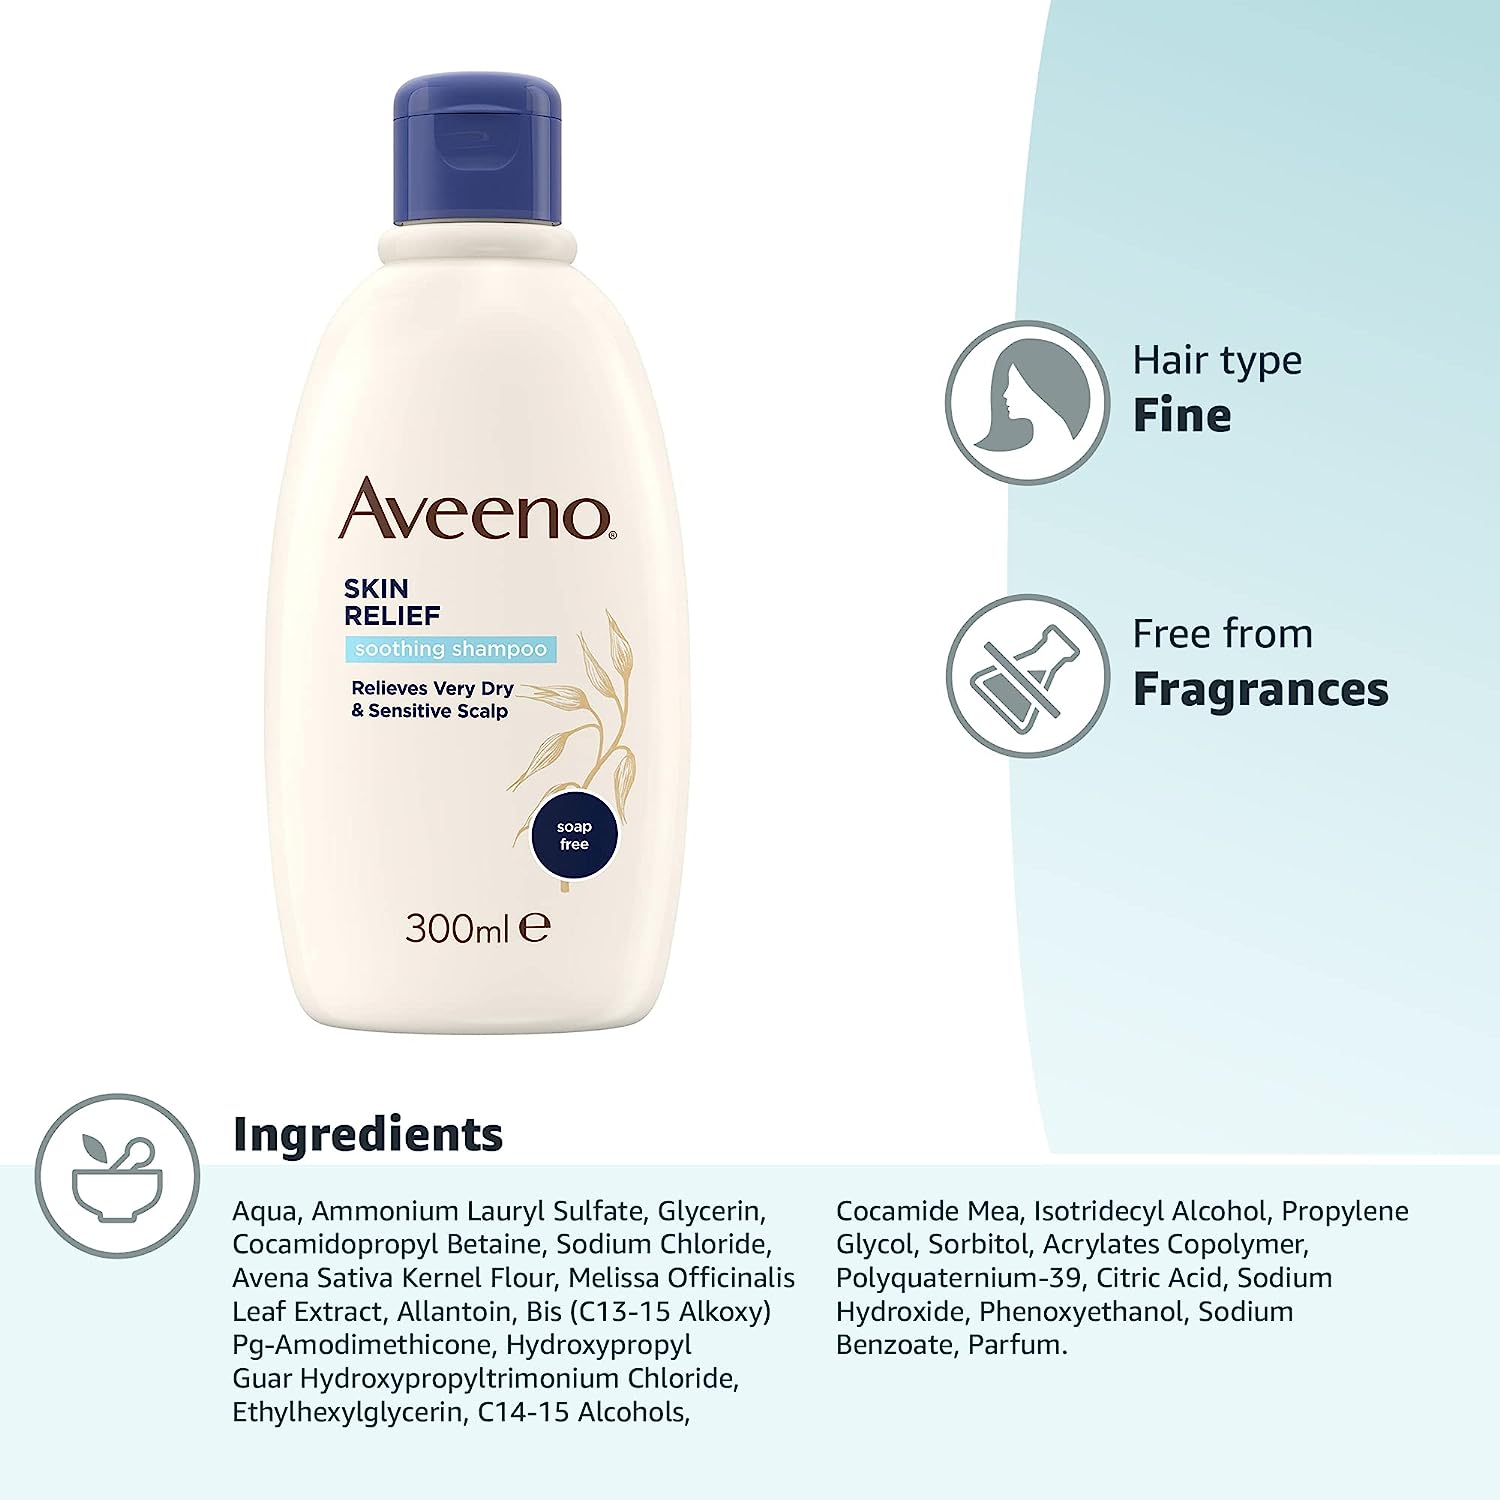 Aveeno Skin Relief Soothing Shampoo | Relieves Very Dry & Sensitive Scalp 300ml - Healthxpress.ie